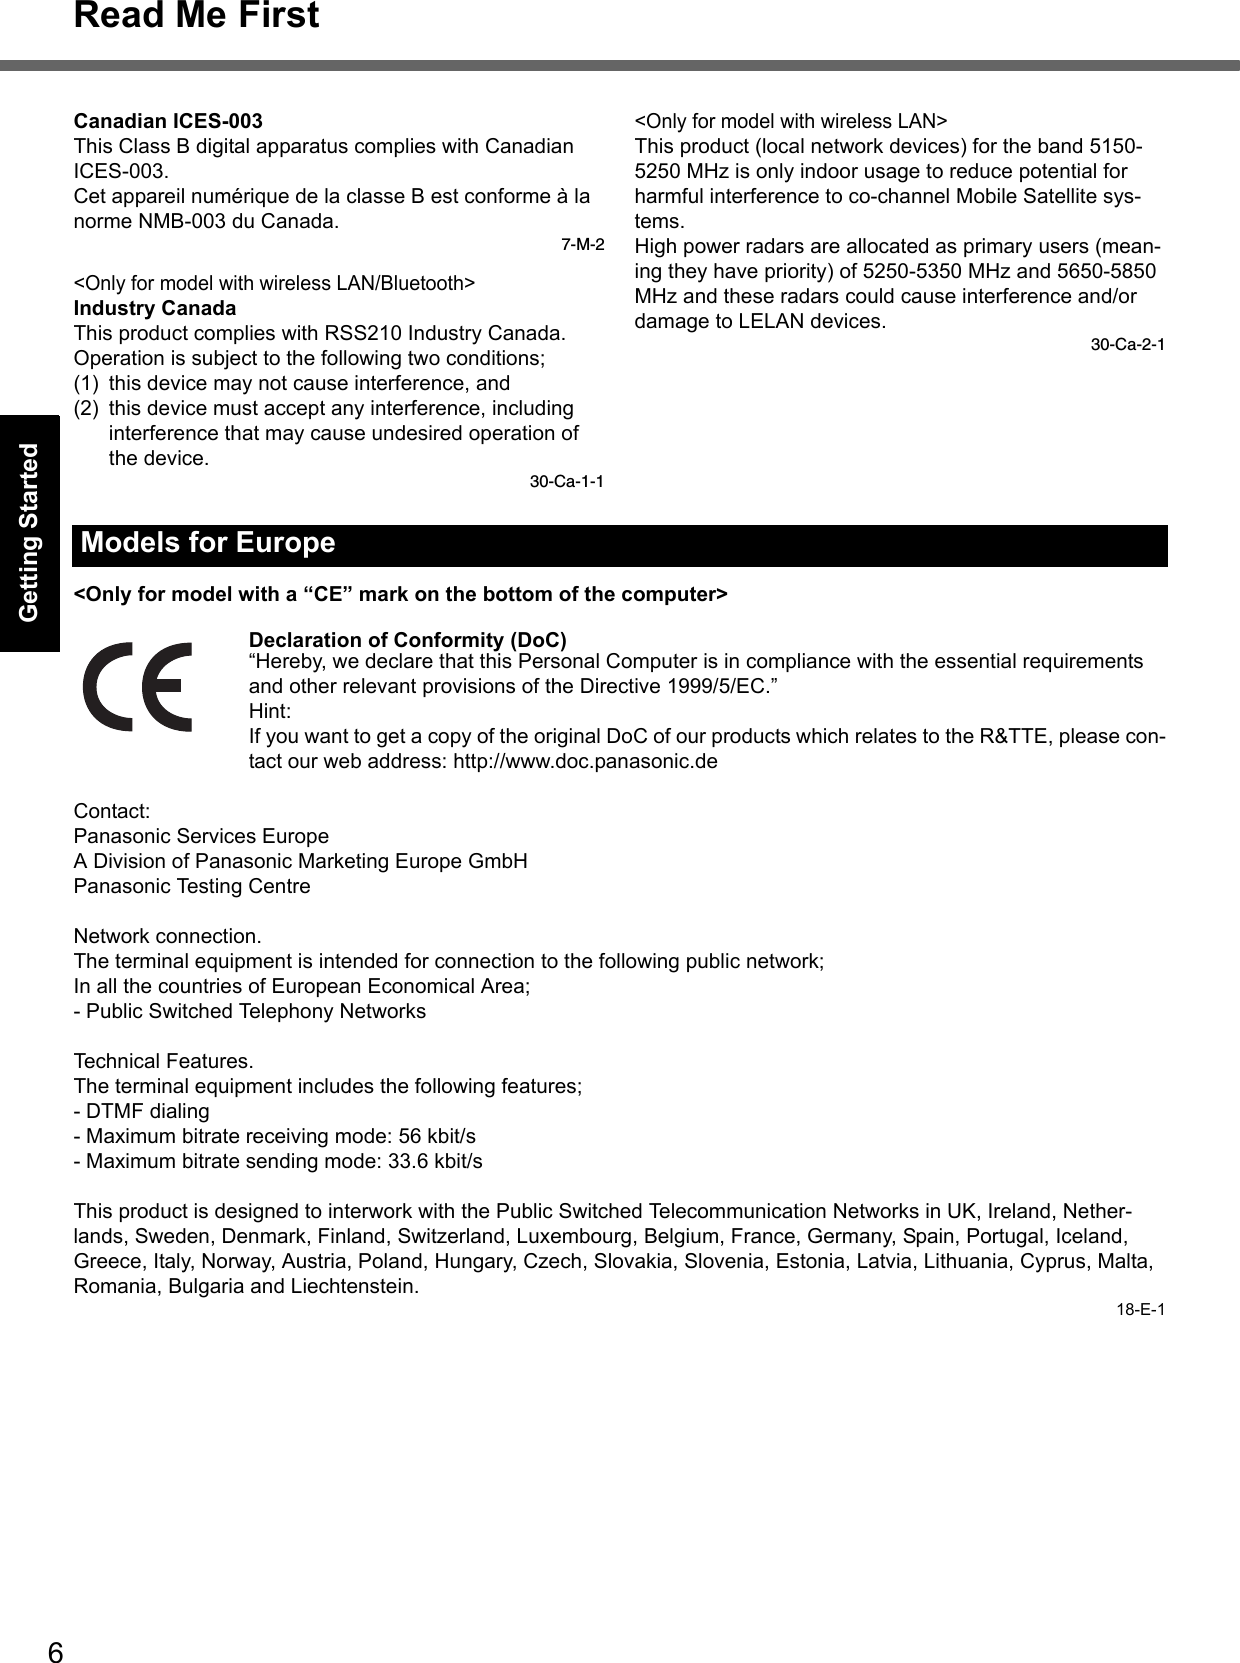 6Read Me FirstGetting StartedUseful InformationTroubleshootingAppendixCanadian ICES-003This Class B digital apparatus complies with Canadian ICES-003.Cet appareil numérique de la classe B est conforme à la norme NMB-003 du Canada.7-M-2&lt;Only for model with wireless LAN/Bluetooth&gt;Industry CanadaThis product complies with RSS210 Industry Canada.Operation is subject to the following two conditions;(1) this device may not cause interference, and(2) this device must accept any interference, including interference that may cause undesired operation of the device.30-Ca-1-1&lt;Only for model with wireless LAN&gt;This product (local network devices) for the band 5150-5250 MHz is only indoor usage to reduce potential for harmful interference to co-channel Mobile Satellite sys-tems.High power radars are allocated as primary users (mean-ing they have priority) of 5250-5350 MHz and 5650-5850 MHz and these radars could cause interference and/or damage to LELAN devices.30-Ca-2-1&lt;Only for model with a “CE” mark on the bottom of the computer&gt;Declaration of Conformity (DoC)“Hereby, we declare that this Personal Computer is in compliance with the essential requirements and other relevant provisions of the Directive 1999/5/EC.”Hint:If you want to get a copy of the original DoC of our products which relates to the R&amp;TTE, please con-tact our web address: http://www.doc.panasonic.deContact:Panasonic Services EuropeA Division of Panasonic Marketing Europe GmbHPanasonic Testing CentreNetwork connection.The terminal equipment is intended for connection to the following public network;In all the countries of European Economical Area;- Public Switched Telephony NetworksTechnical Features.The terminal equipment includes the following features;- DTMF dialing- Maximum bitrate receiving mode: 56 kbit/s- Maximum bitrate sending mode: 33.6 kbit/sThis product is designed to interwork with the Public Switched Telecommunication Networks in UK, Ireland, Nether-lands, Sweden, Denmark, Finland, Switzerland, Luxembourg, Belgium, France, Germany, Spain, Portugal, Iceland, Greece, Italy, Norway, Austria, Poland, Hungary, Czech, Slovakia, Slovenia, Estonia, Latvia, Lithuania, Cyprus, Malta, Romania, Bulgaria and Liechtenstein.18-E-1Models for Europe